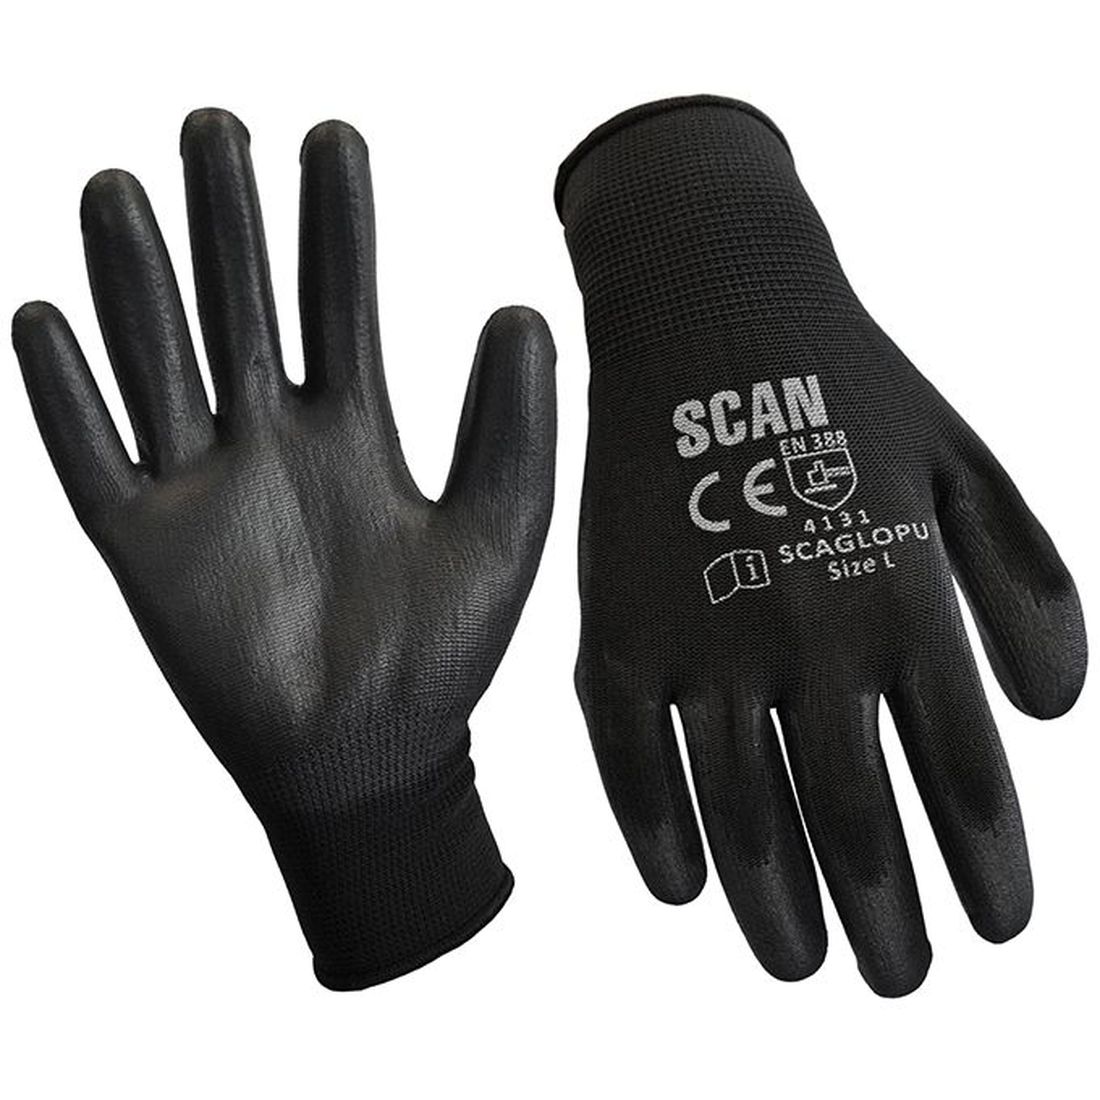 Scan Black PU Coated Gloves - L (Size 9) (240 Pairs)                                 